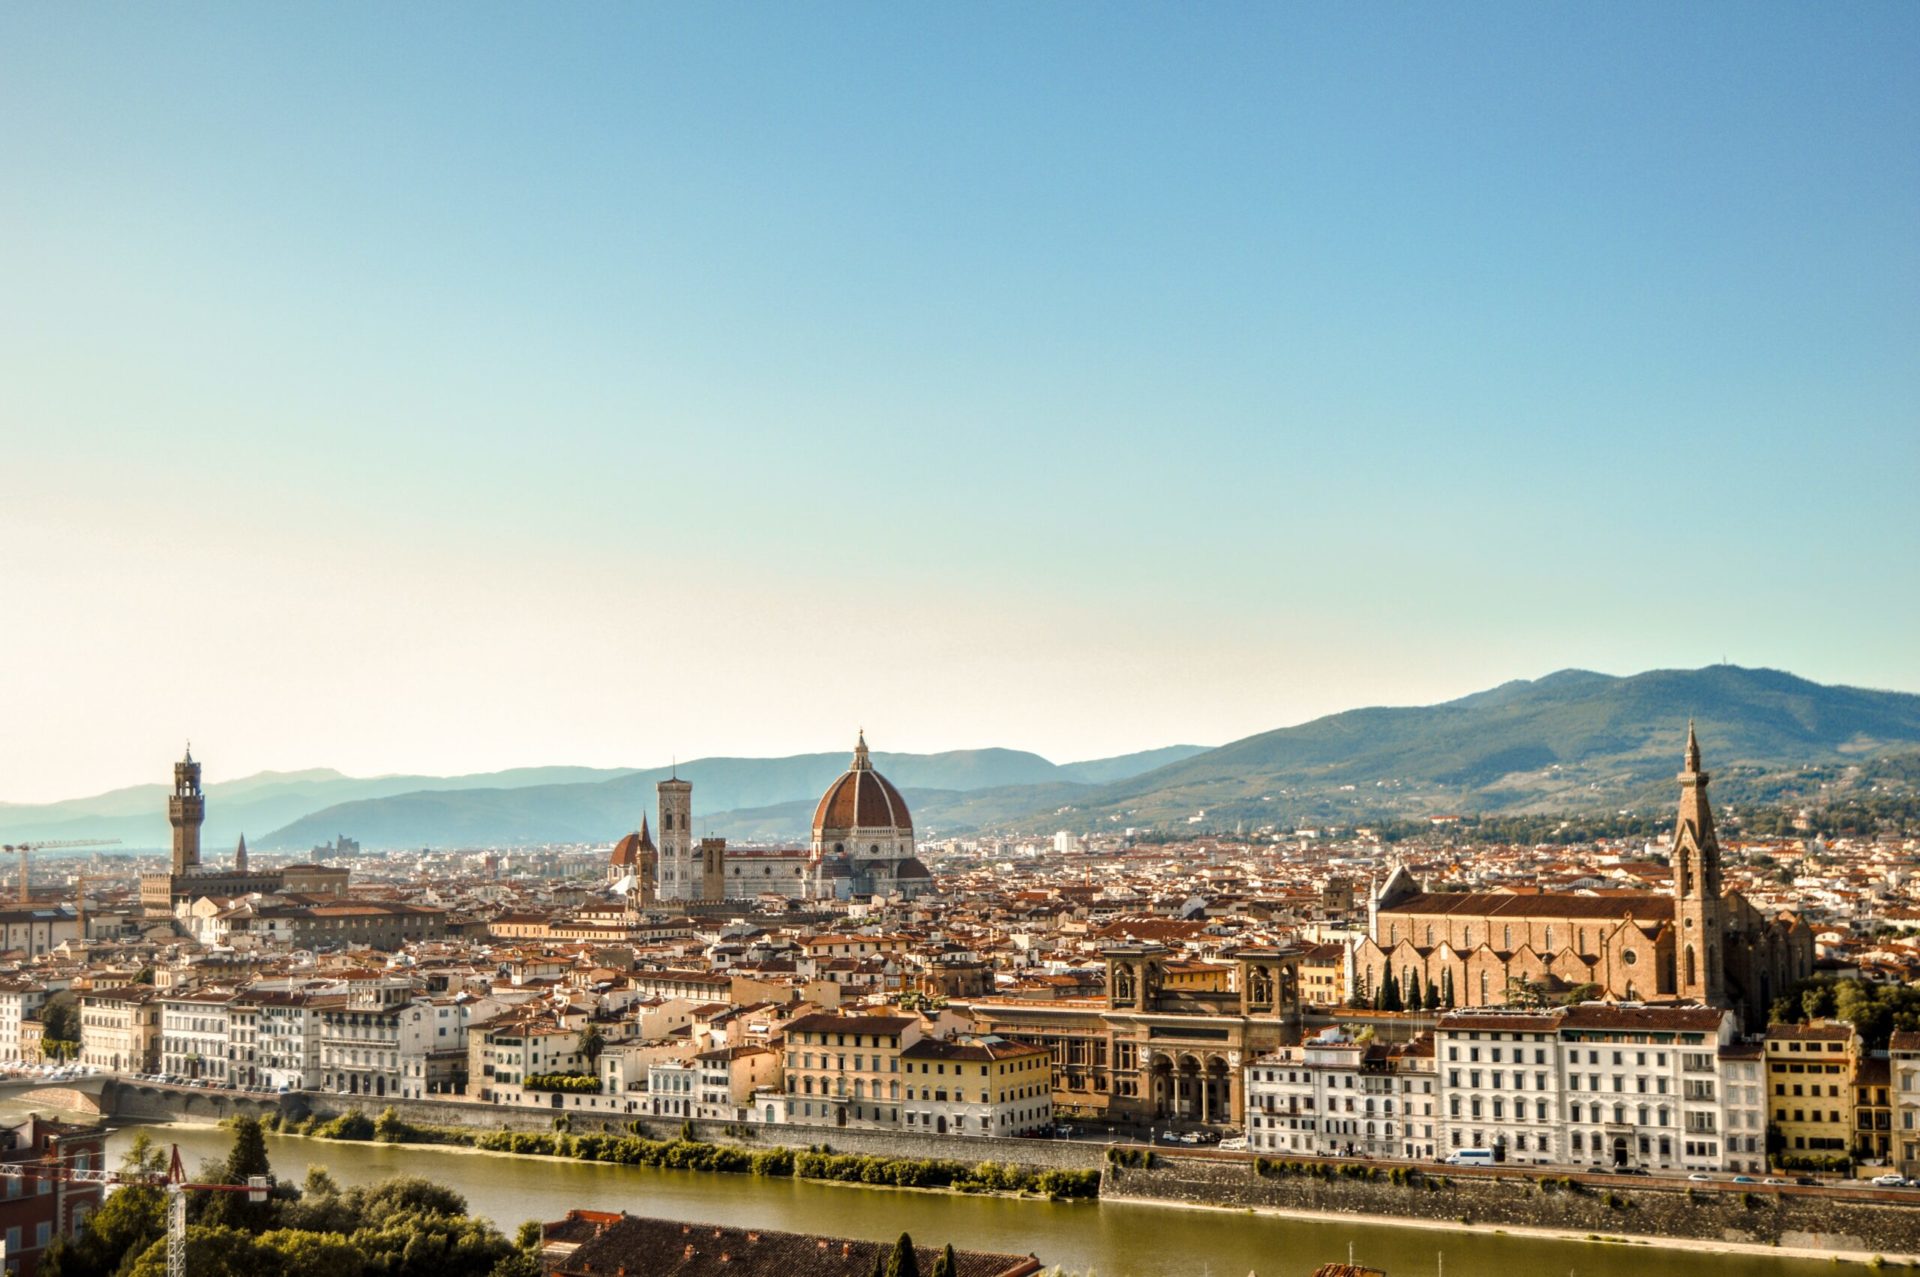 Participant Blog: My Journey in Florence